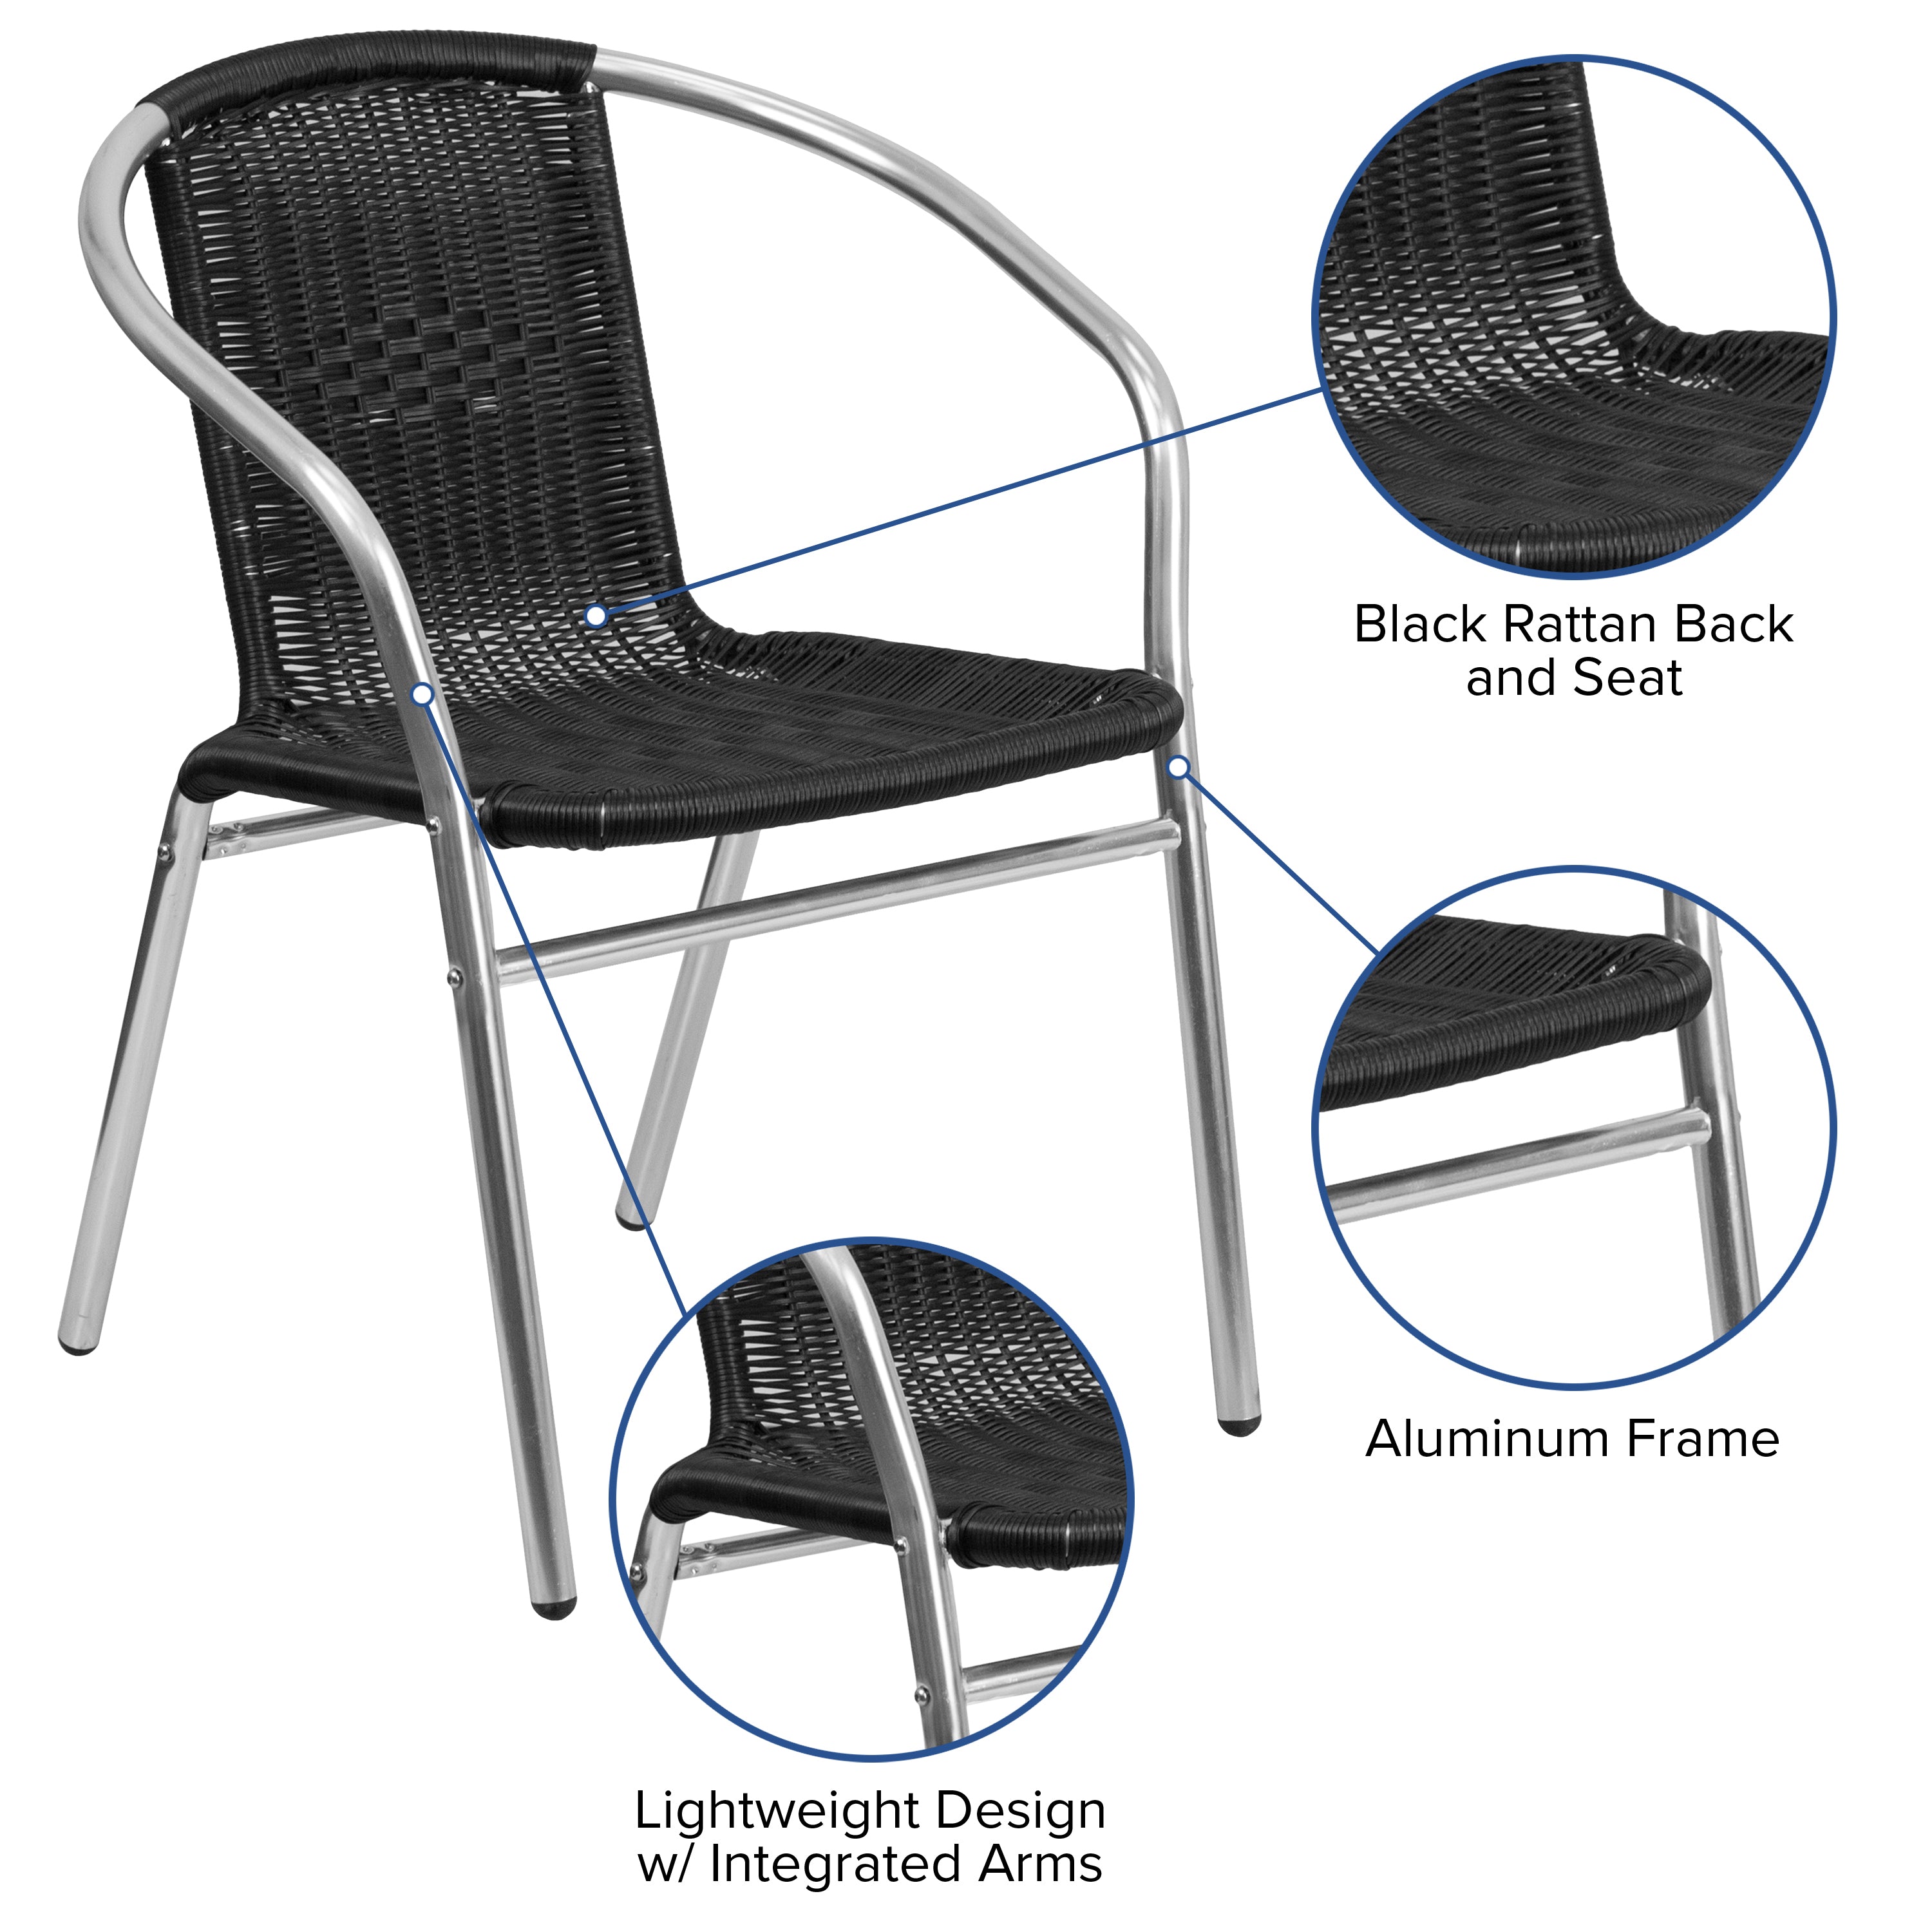 Lila Aluminum and Rattan Commercial Indoor-Outdoor Restaurant Stack Chair-Indoor/Outdoor Chairs-Flash Furniture-Wall2Wall Furnishings